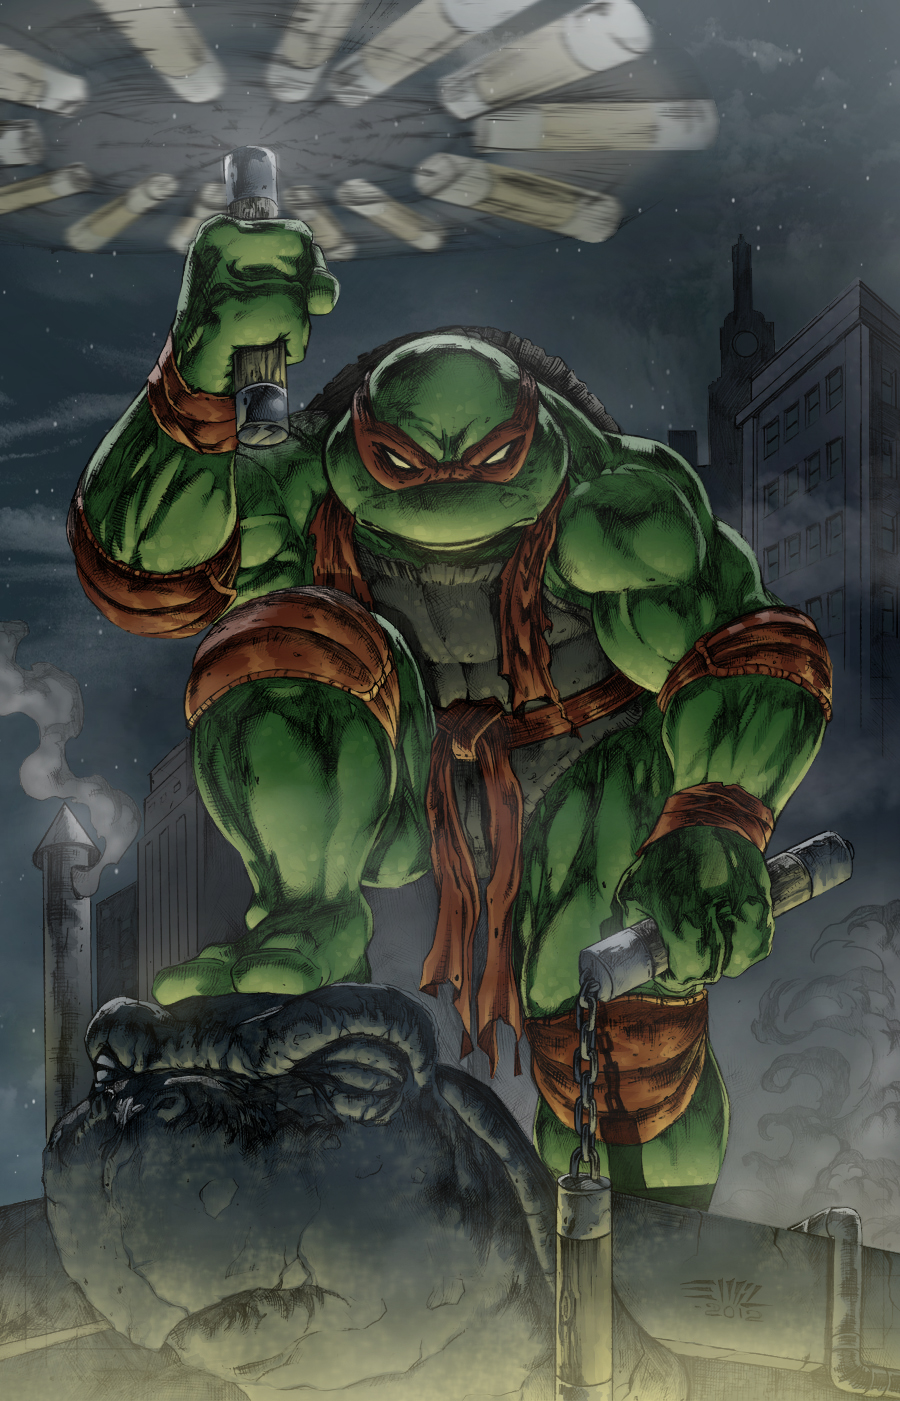 meubilair capsule opleiding Michelangelo (Mikey - TMNT) by Mariano1990 on DeviantArt